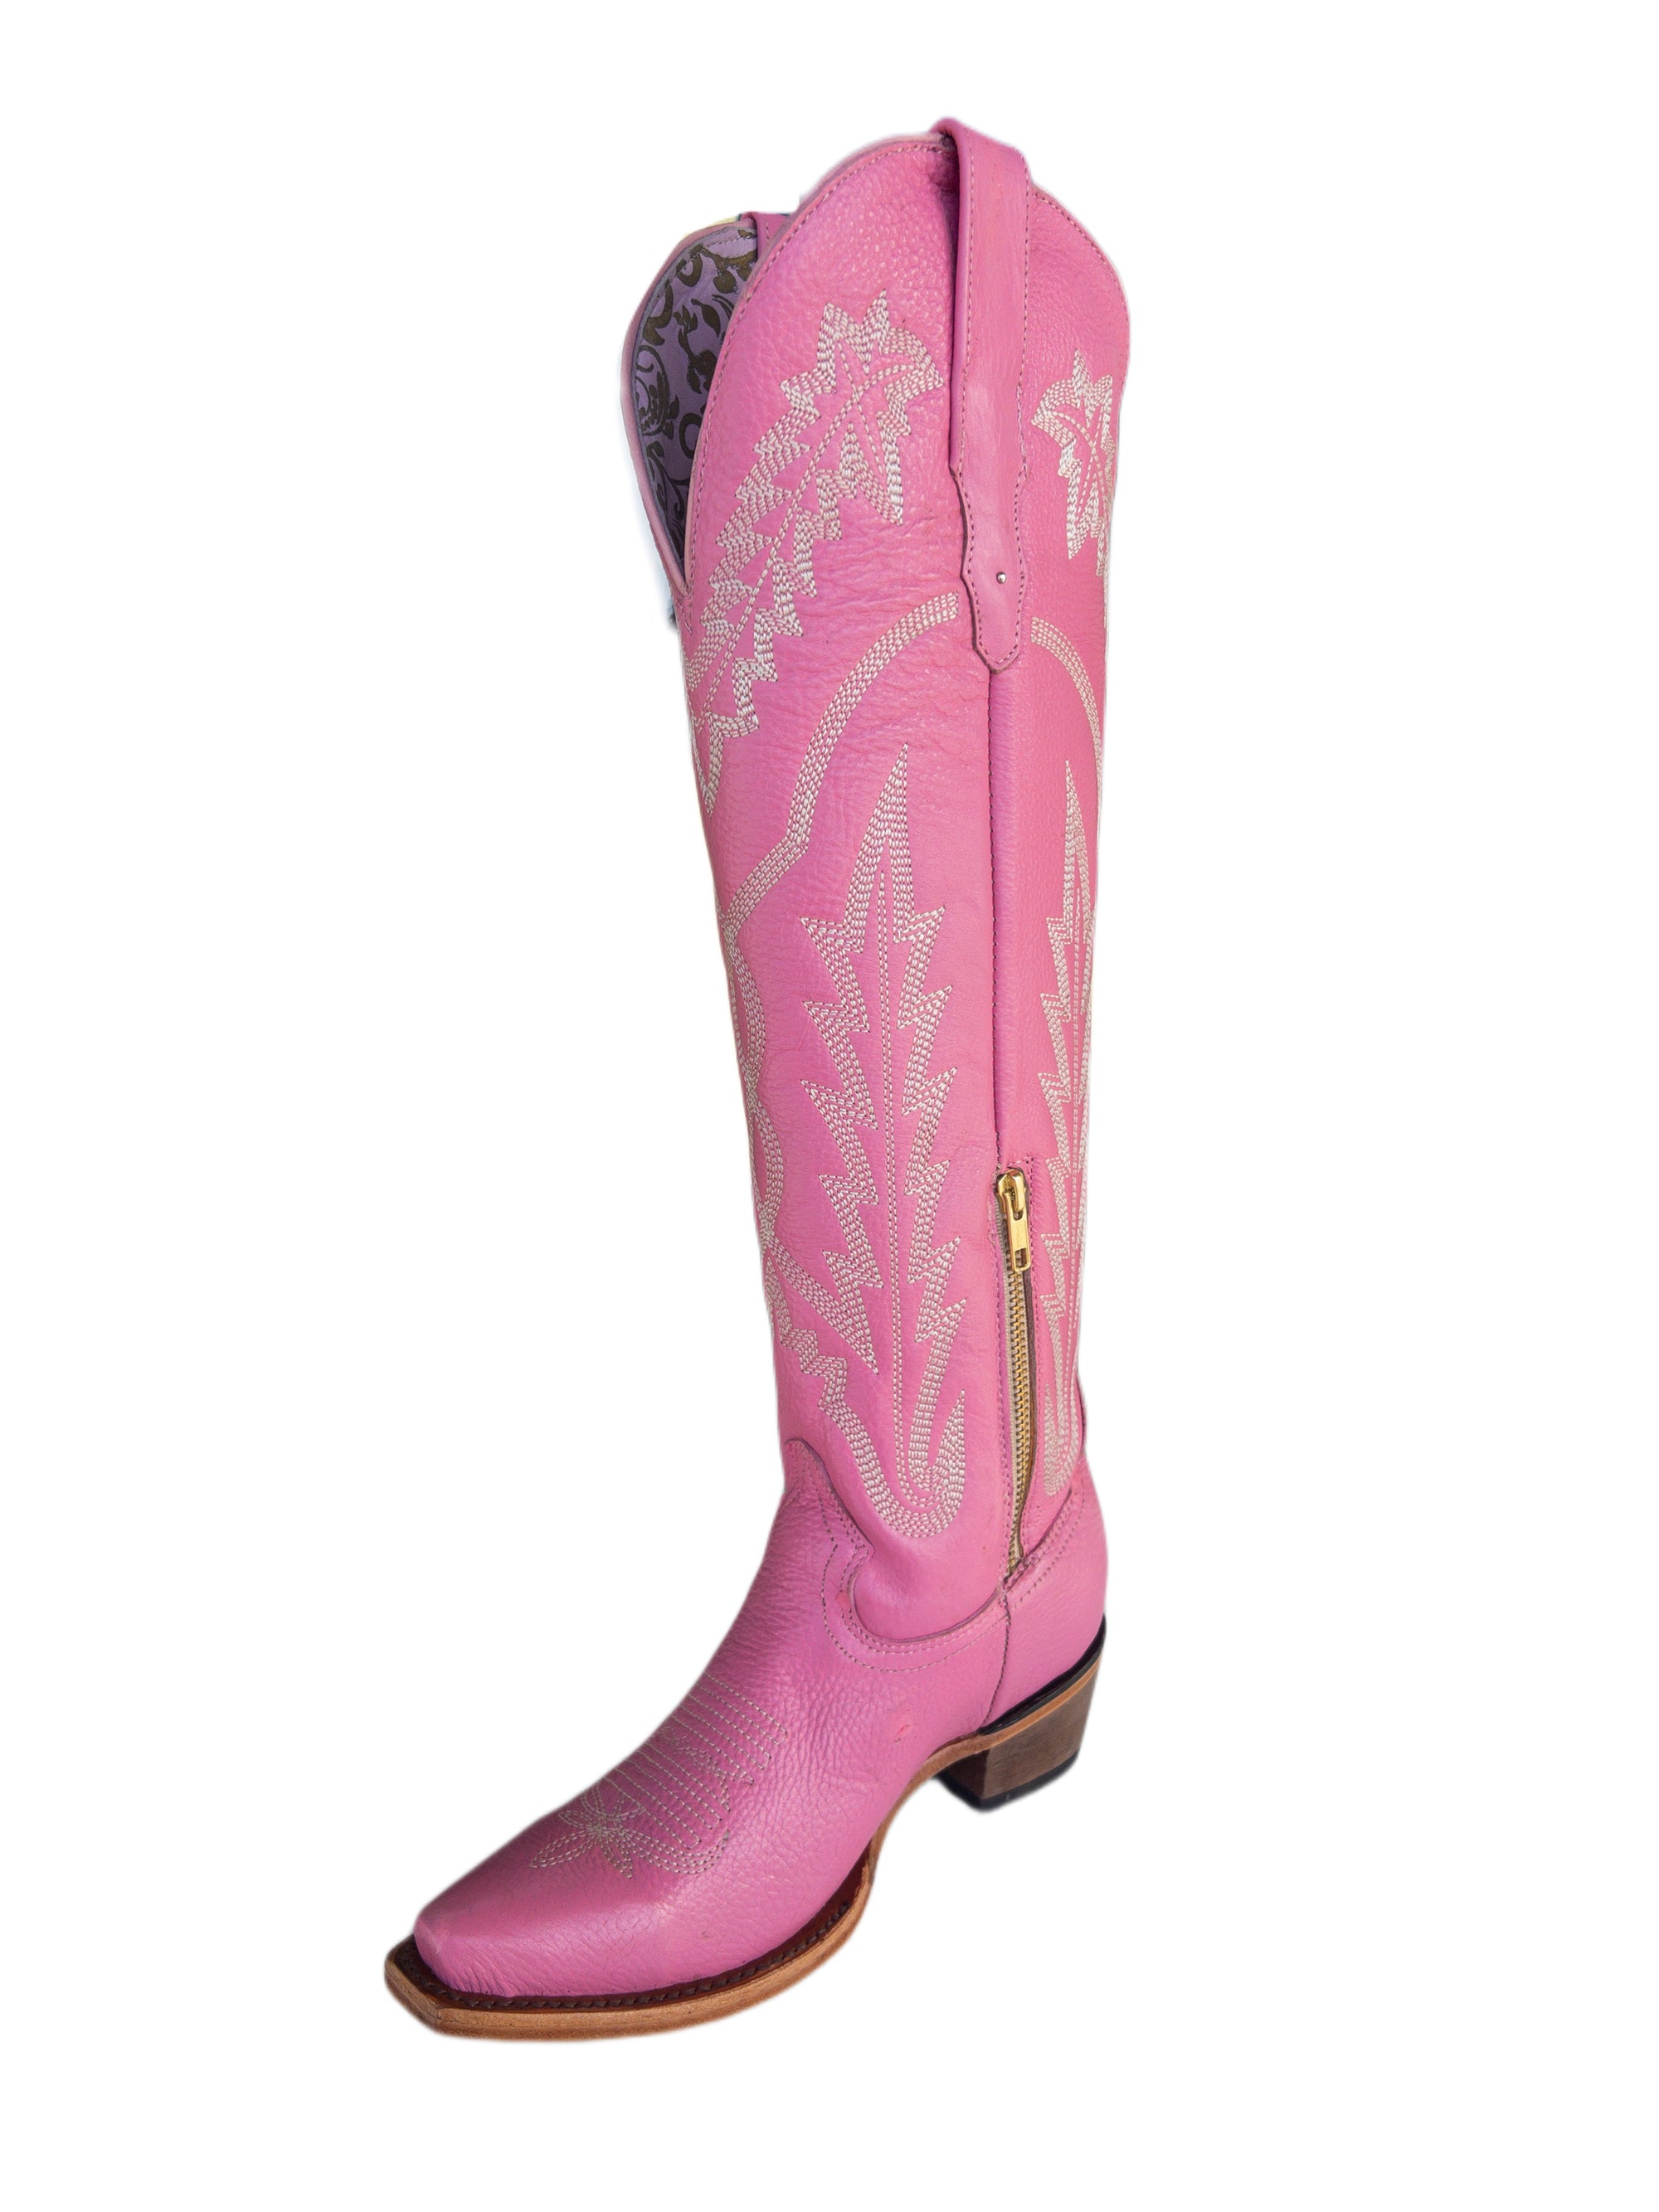 PINK PASTEL TALL COWGIRL BOOTS